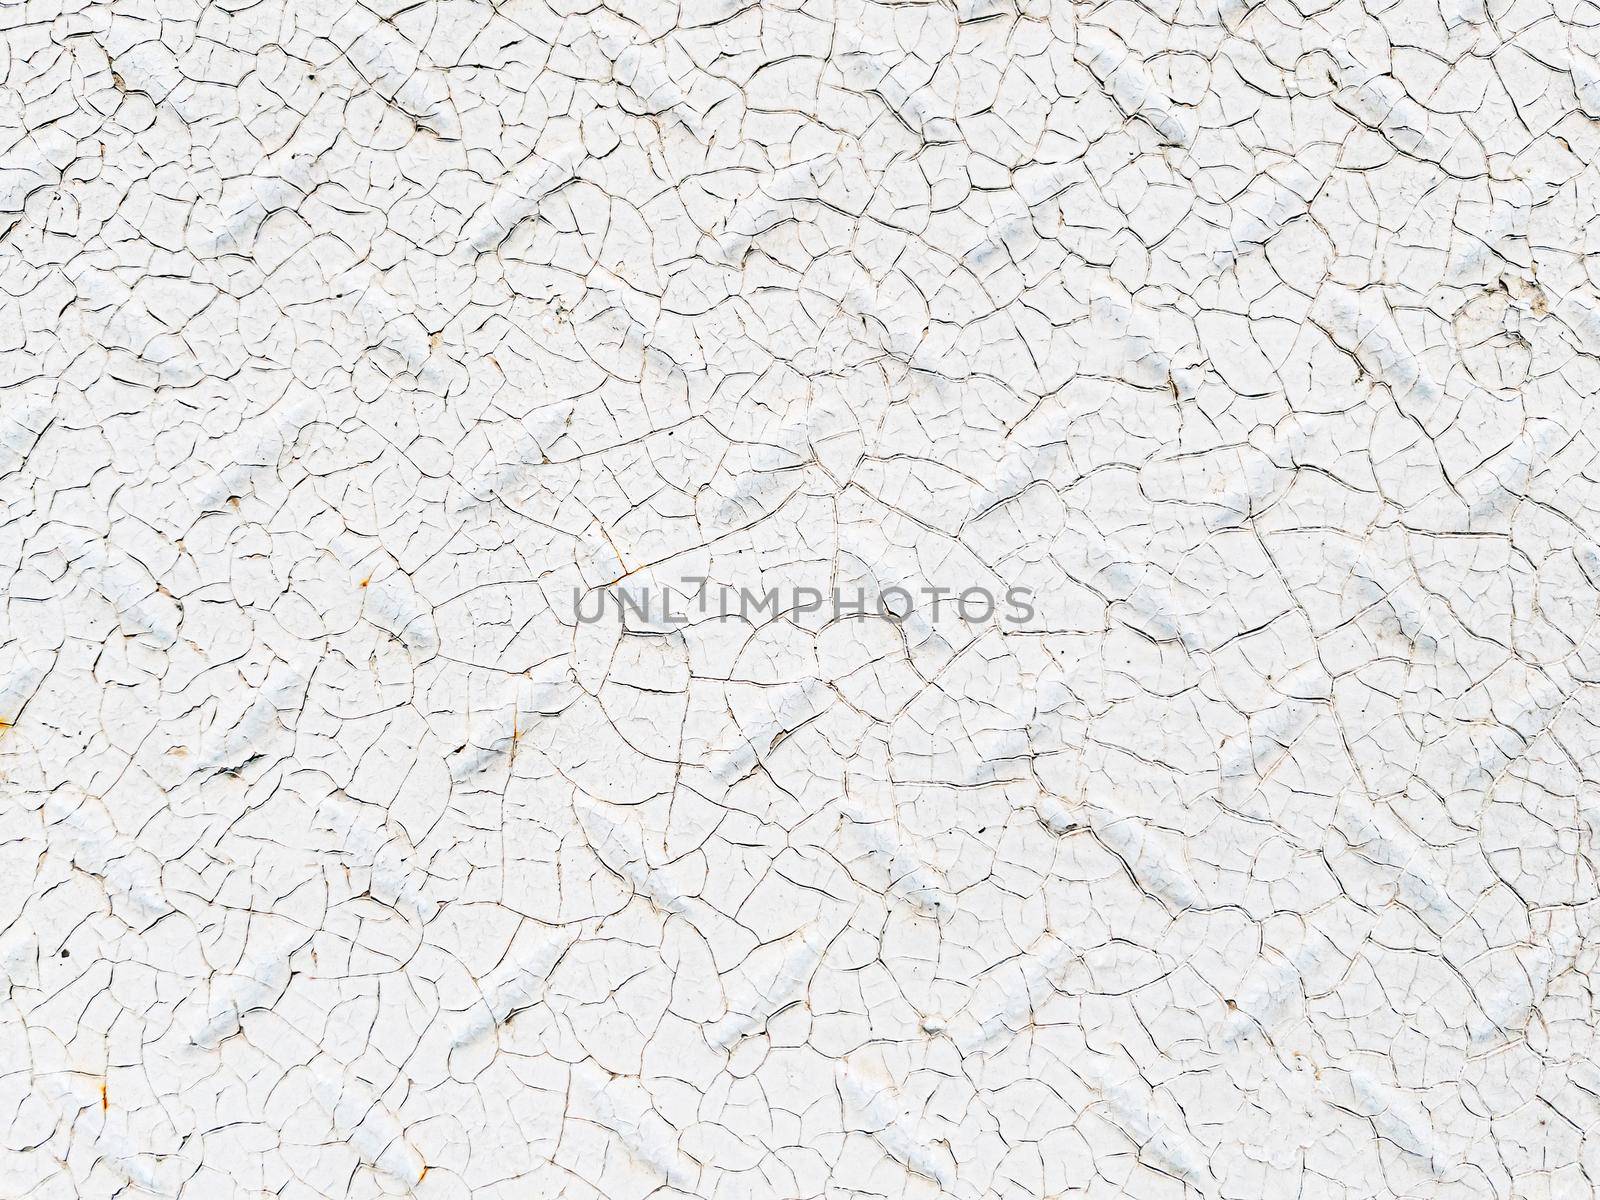 White steel corrugated sheet with texture surface as a background in full screen